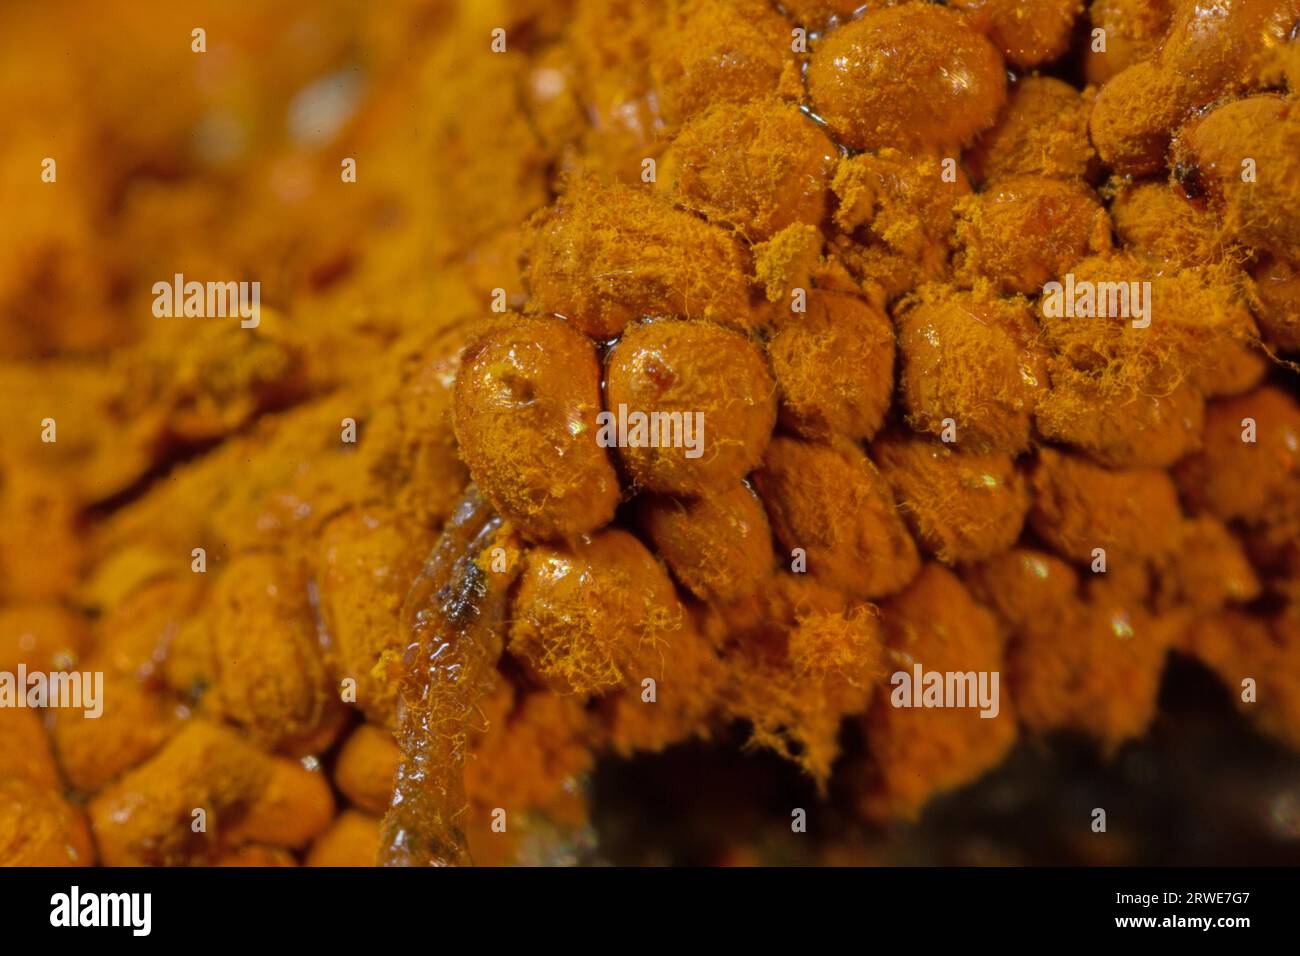 Yellow false hairy mushroom some fruiting bodies with fuzzy yellowish heads next to each other Stock Photo